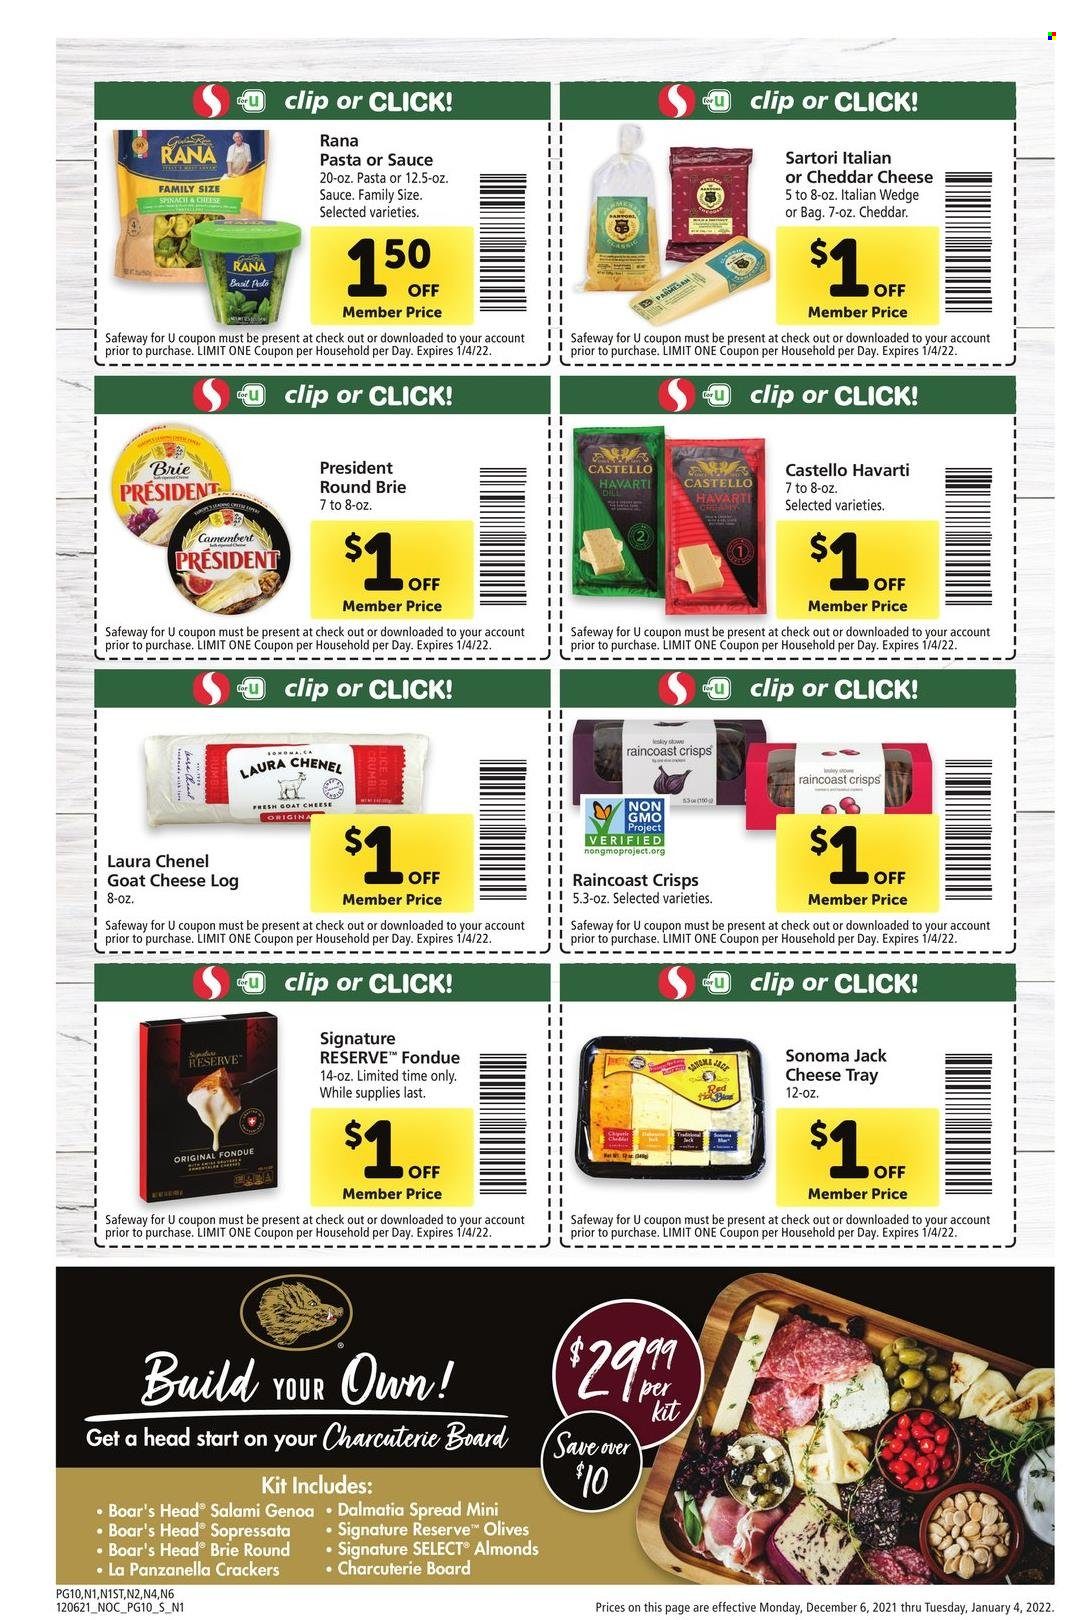 thumbnail - Safeway Flyer - 12/06/2021 - 01/04/2022 - Sales products - Rana, salami, camembert, goat cheese, Havarti, cheese, brie, Président, crackers, olives, almonds. Page 10.